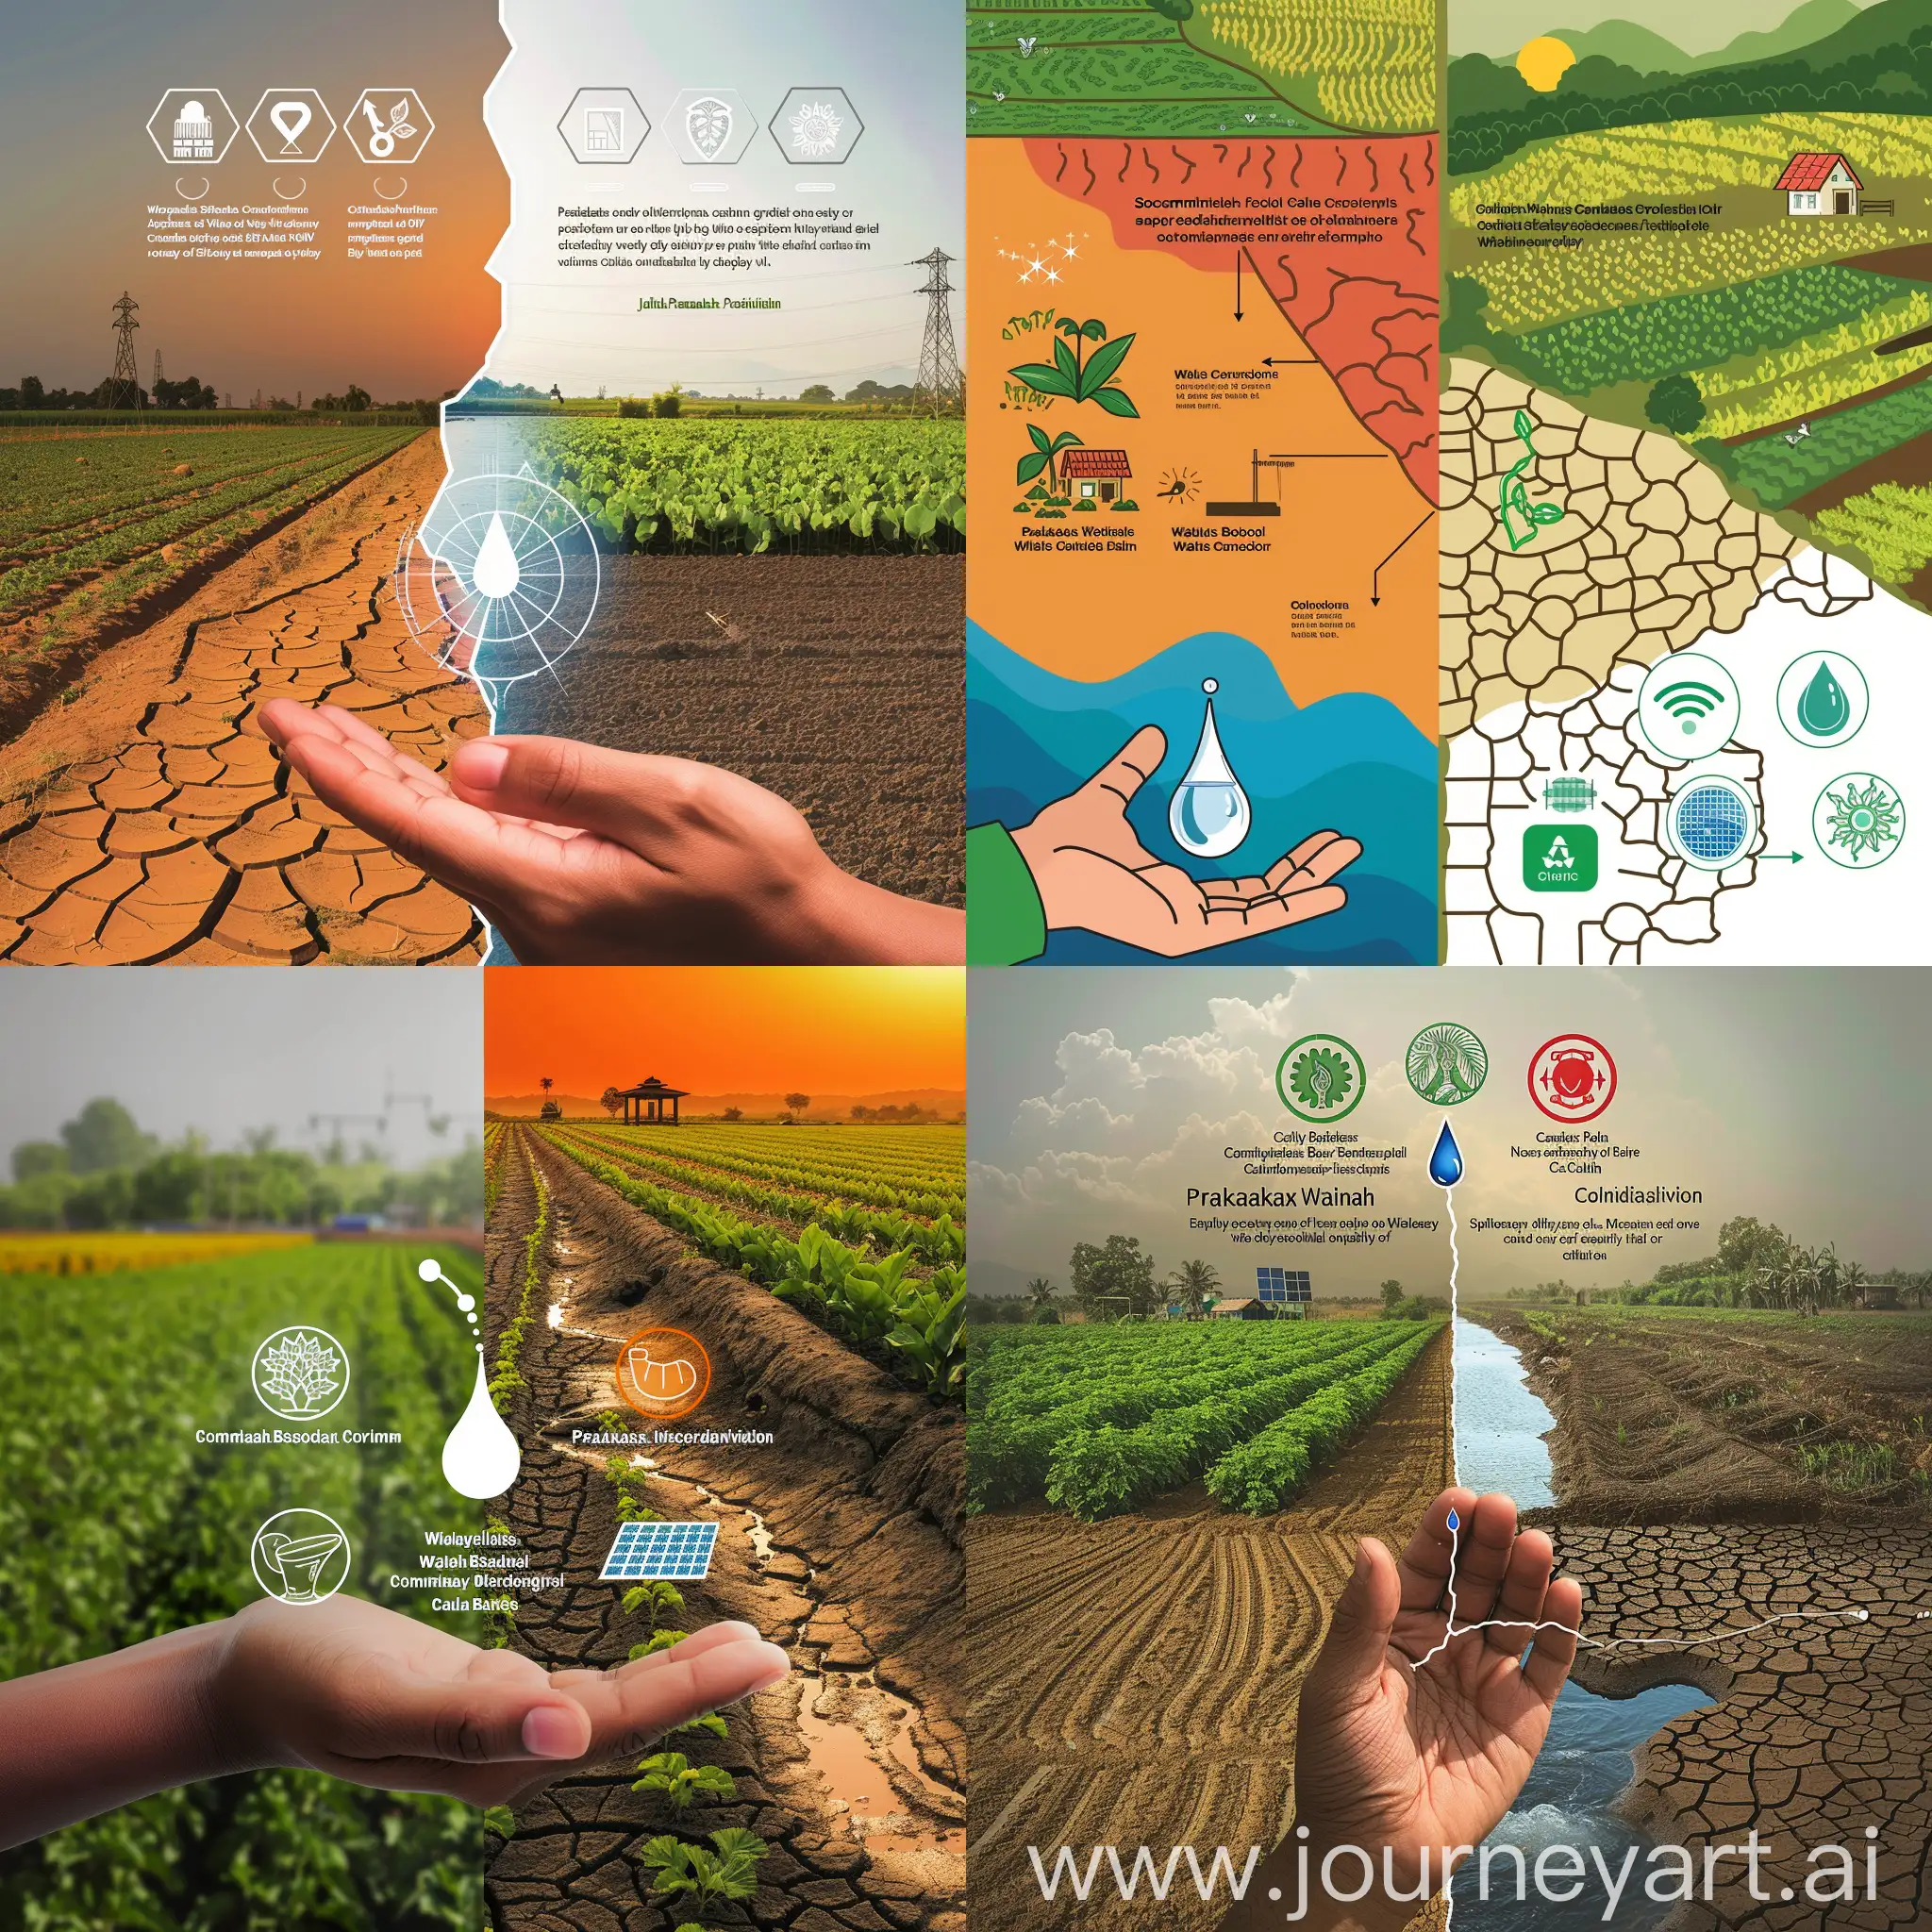 Background: A split image with one side depicting lush farmland and the other a dry, cracked landscape. Center: A hand cradling a single drop of water. Icons representing solutions: A small community well. A farmer using a drip irrigation system. A solar panel powering a water treatment plant.Text:  Problem: India faces a water crisis, fueled by unsustainable agricultural practices and mismanagement. (Bullet point) Solution: We need innovative approaches to water management! (Bullet point) Social Innovation:  Community-Based Organizations (CBOs): Empowering communities to manage water resources through: Traditional water harvesting techniques: Reviving ancient knowledge like rooftop rainwater harvesting and traditional wells. Water literacy programs: Educating communities about sustainable water use and conservation. Community monitoring and management: Enabling communities to have a say in water resource management and hold authorities accountable. Example:  Prakash Foundation: A CBO working in rural India by: Building rainwater harvesting structures in villages. Promoting water conservation practices among farmers. Establishing village water committees for decision-making. Call to Action:  Join the movement! Support CBOs like Prakash Foundation and advocate for sustainable water policies. Together, we can create a water-secure future for India! Note: This digital poster avoids religious themes and incorporates all the required elements, including the chosen social innovation pathway (Community Based Organizations) and an example (Prakash Foundation). It also uses visuals and text to effectively communicate the problem, solution, and call to action.